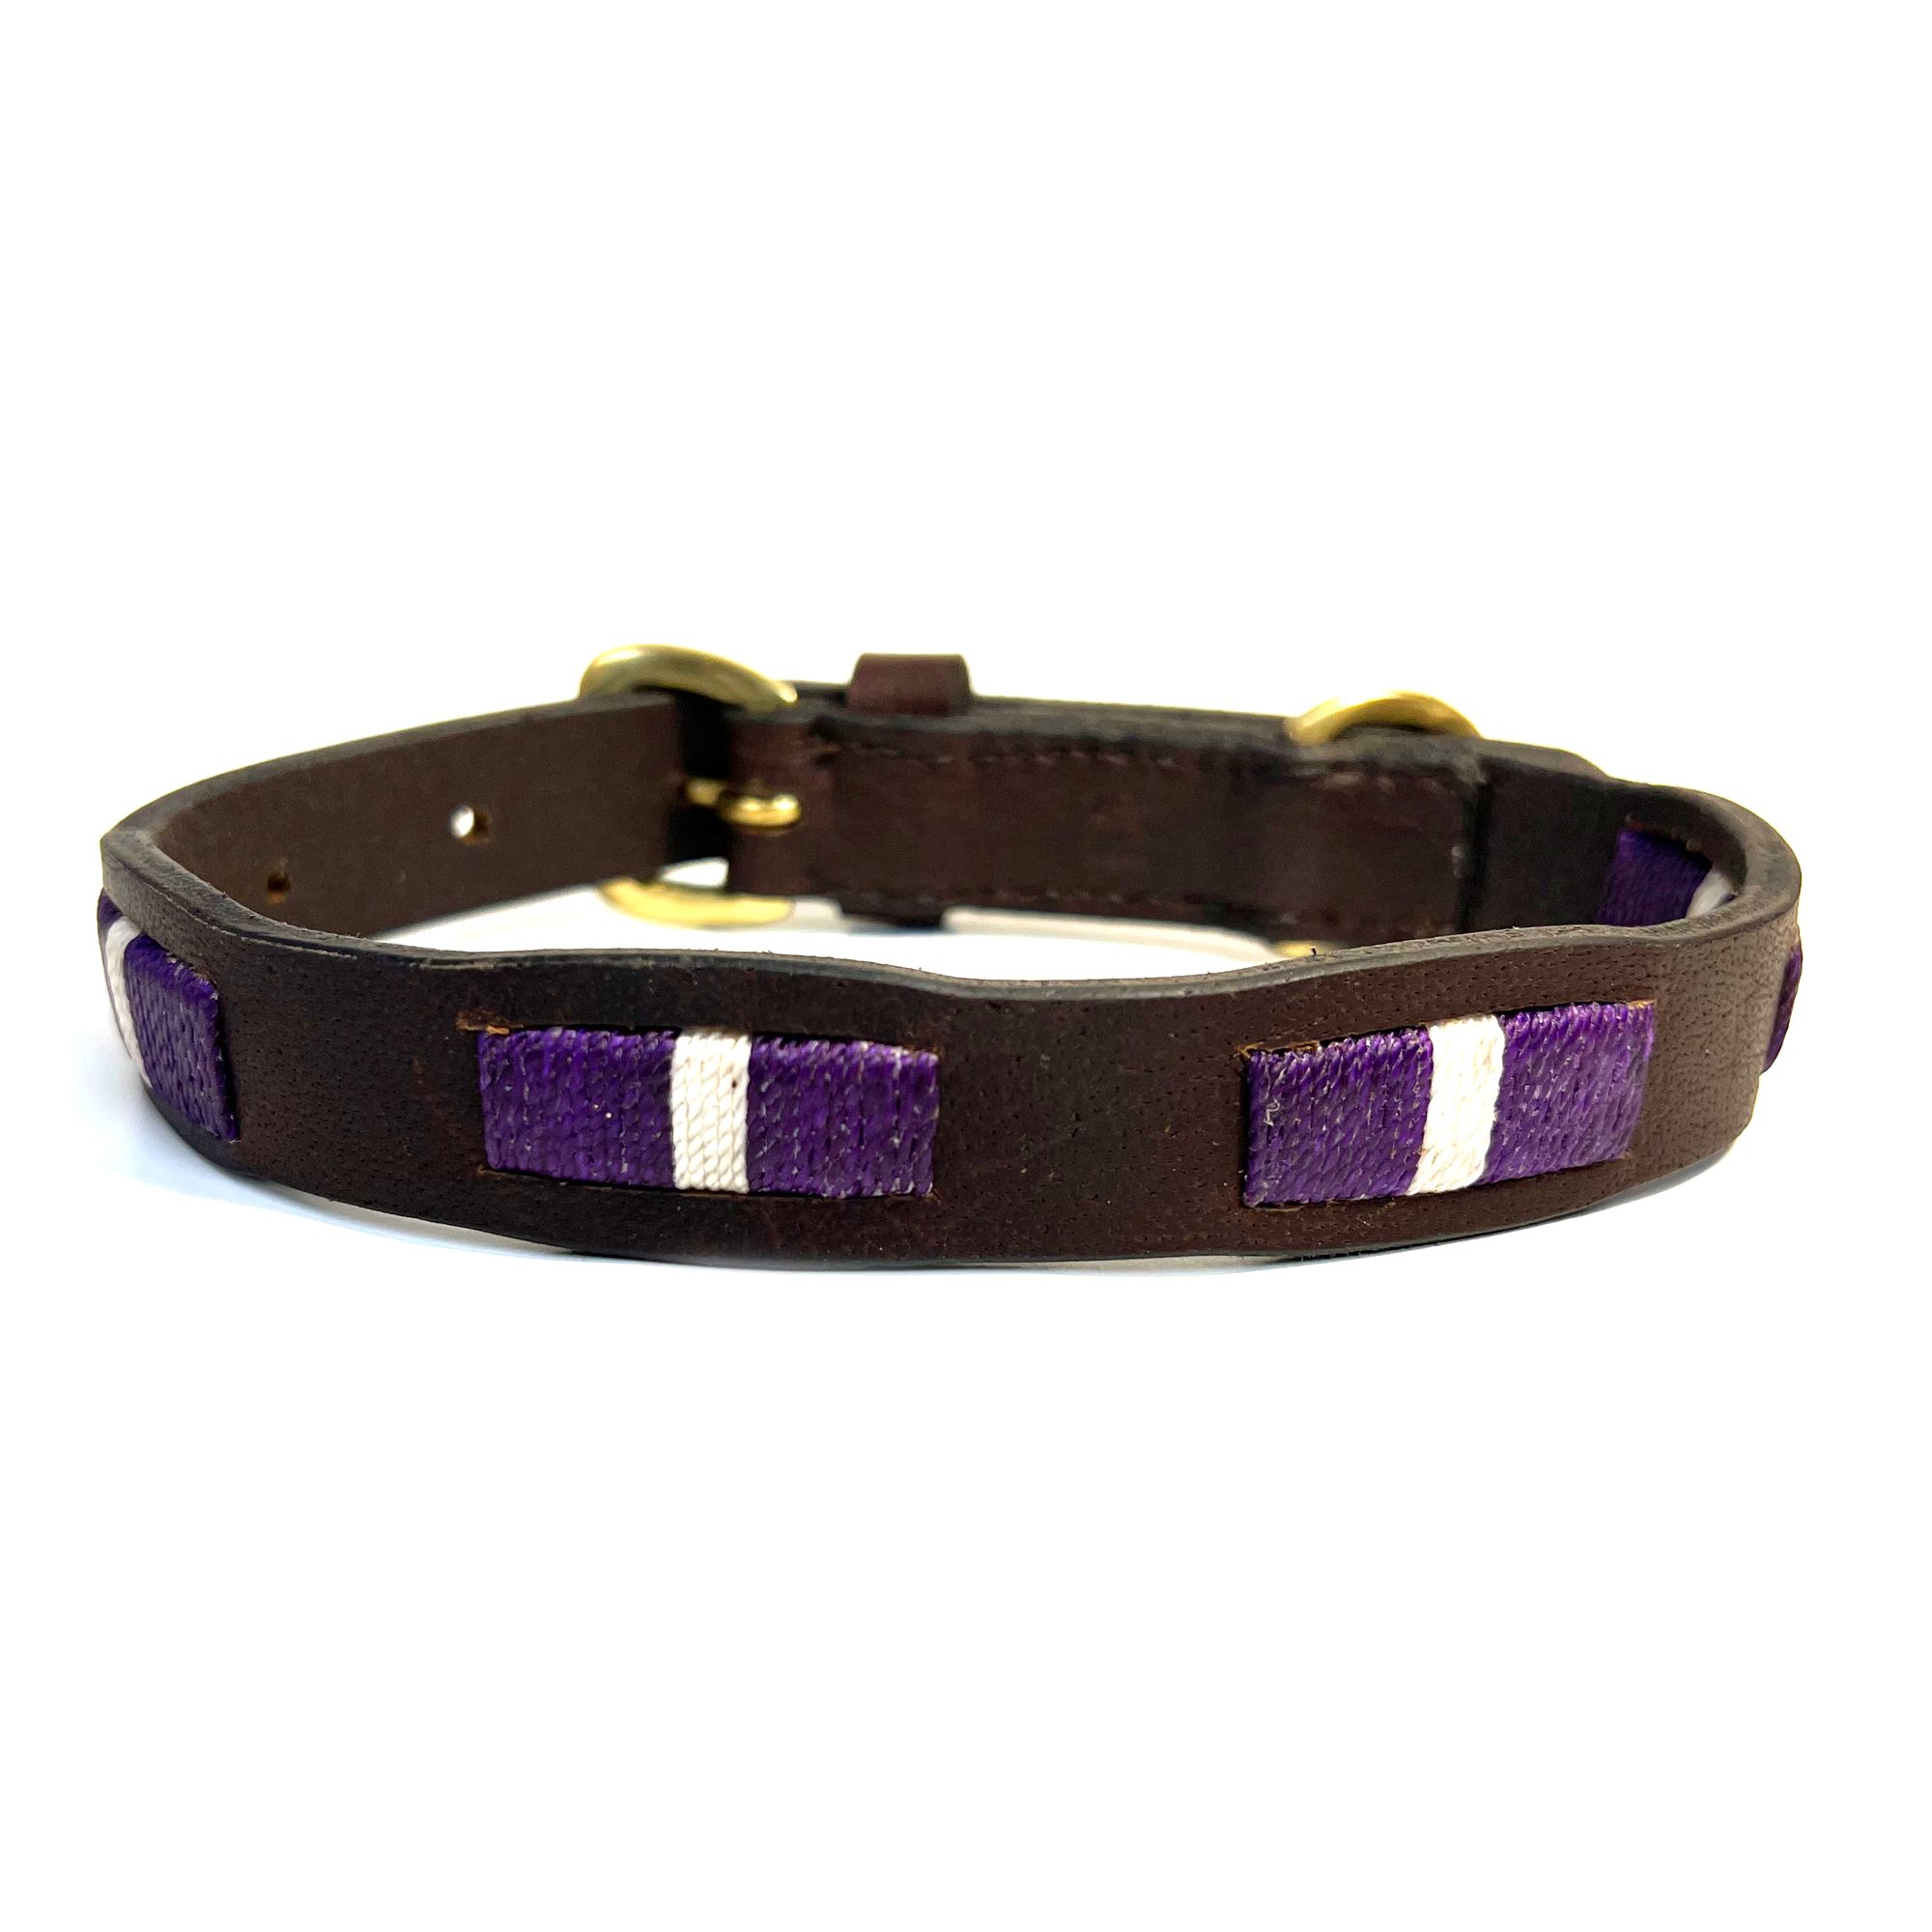 handmade natural leather dog collar, with decorative purple and white stitching.  Strong, sustainable and compostable brown waxed leather Buffalo Leather.Aged brass buckle